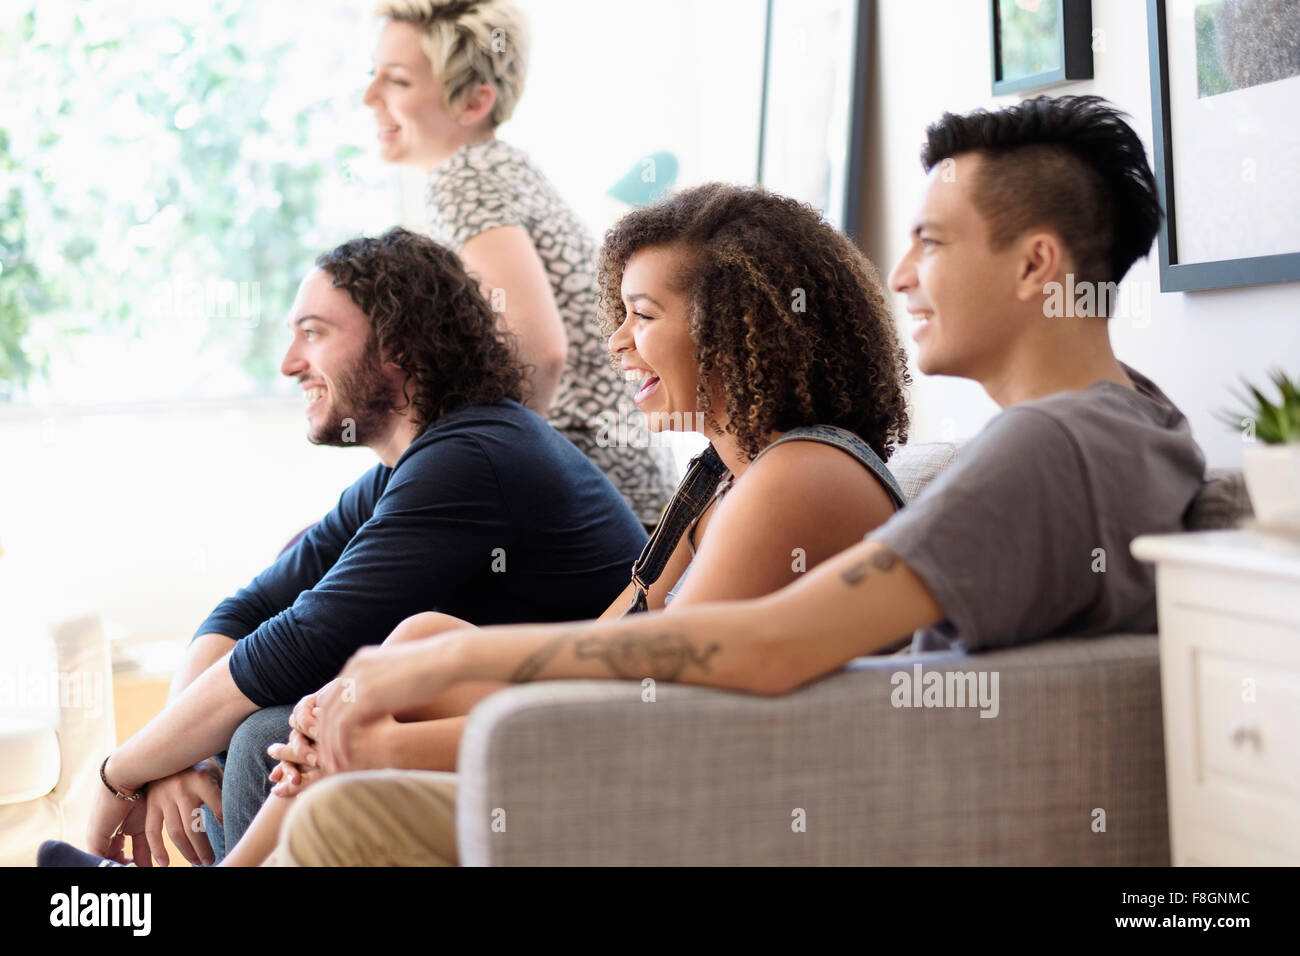 Friends watching television on sofa Banque D'Images